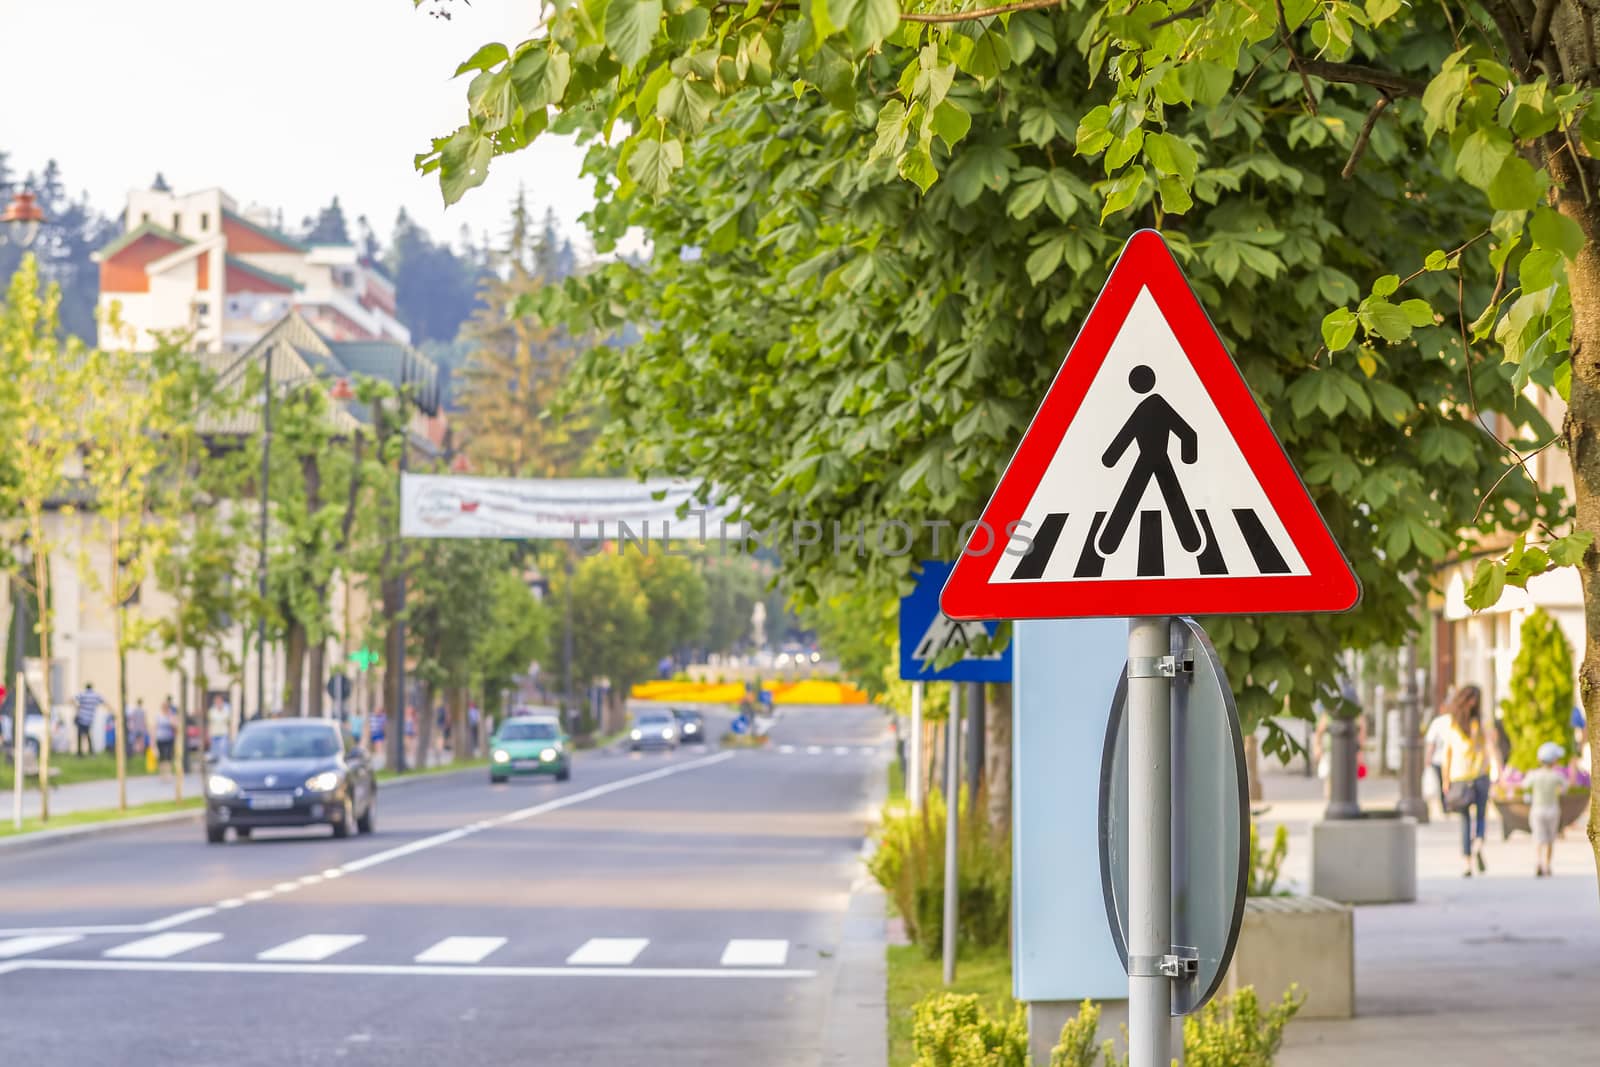 warning sign for pedestrian crossing by manaemedia